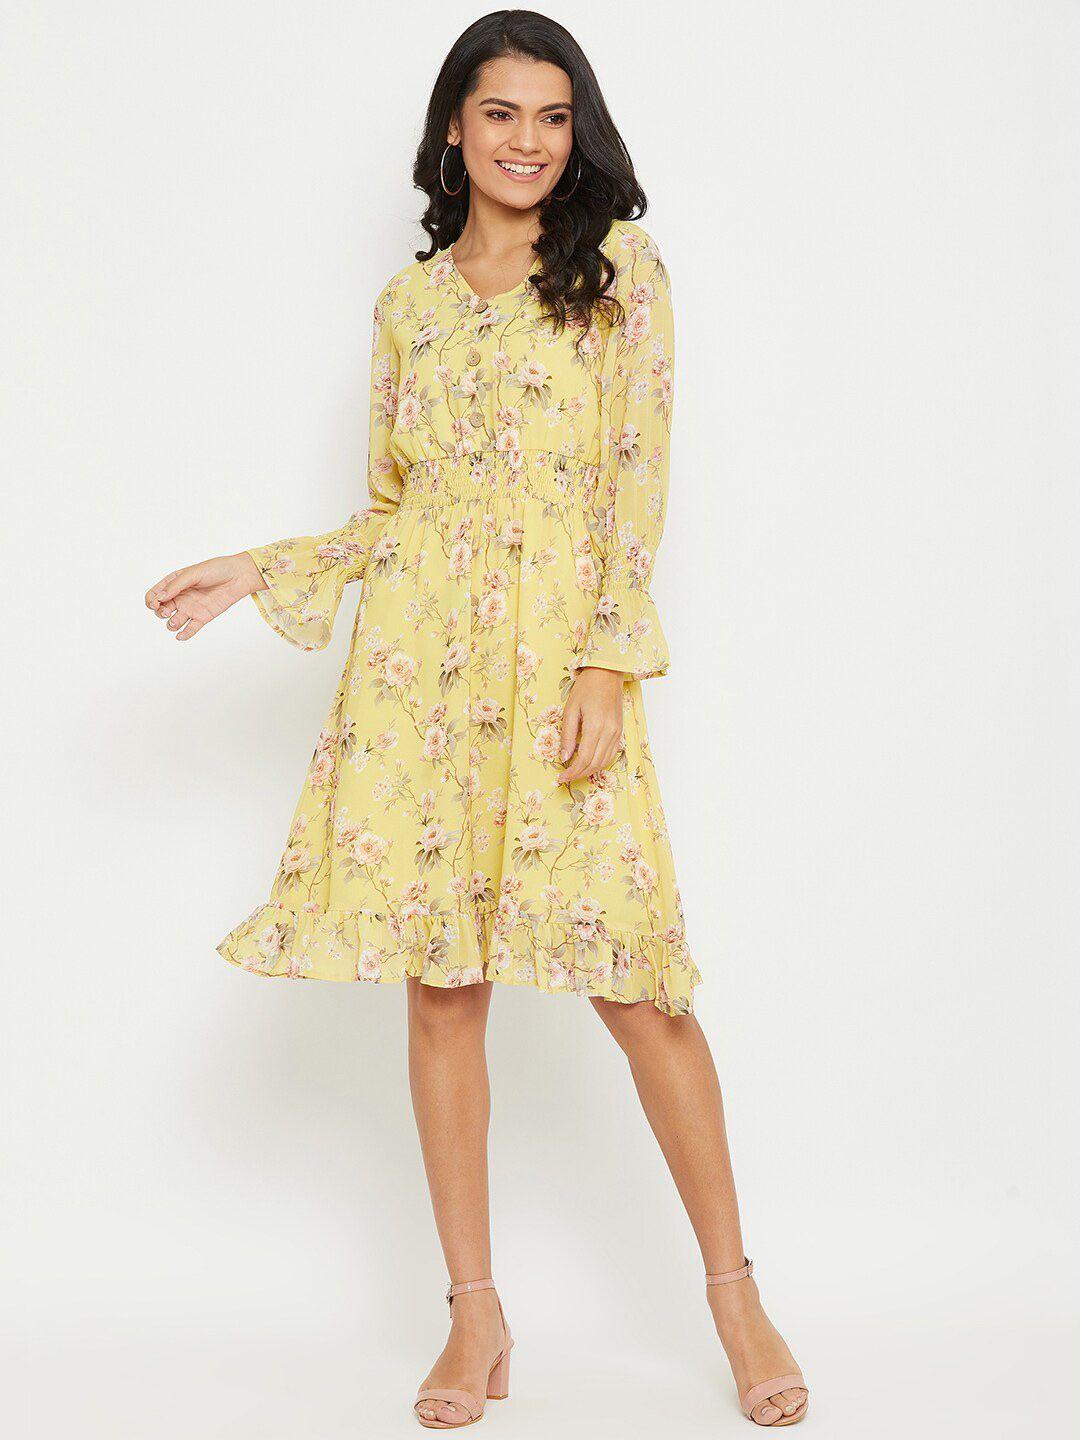 panit-yellow-floral-georgette-dress